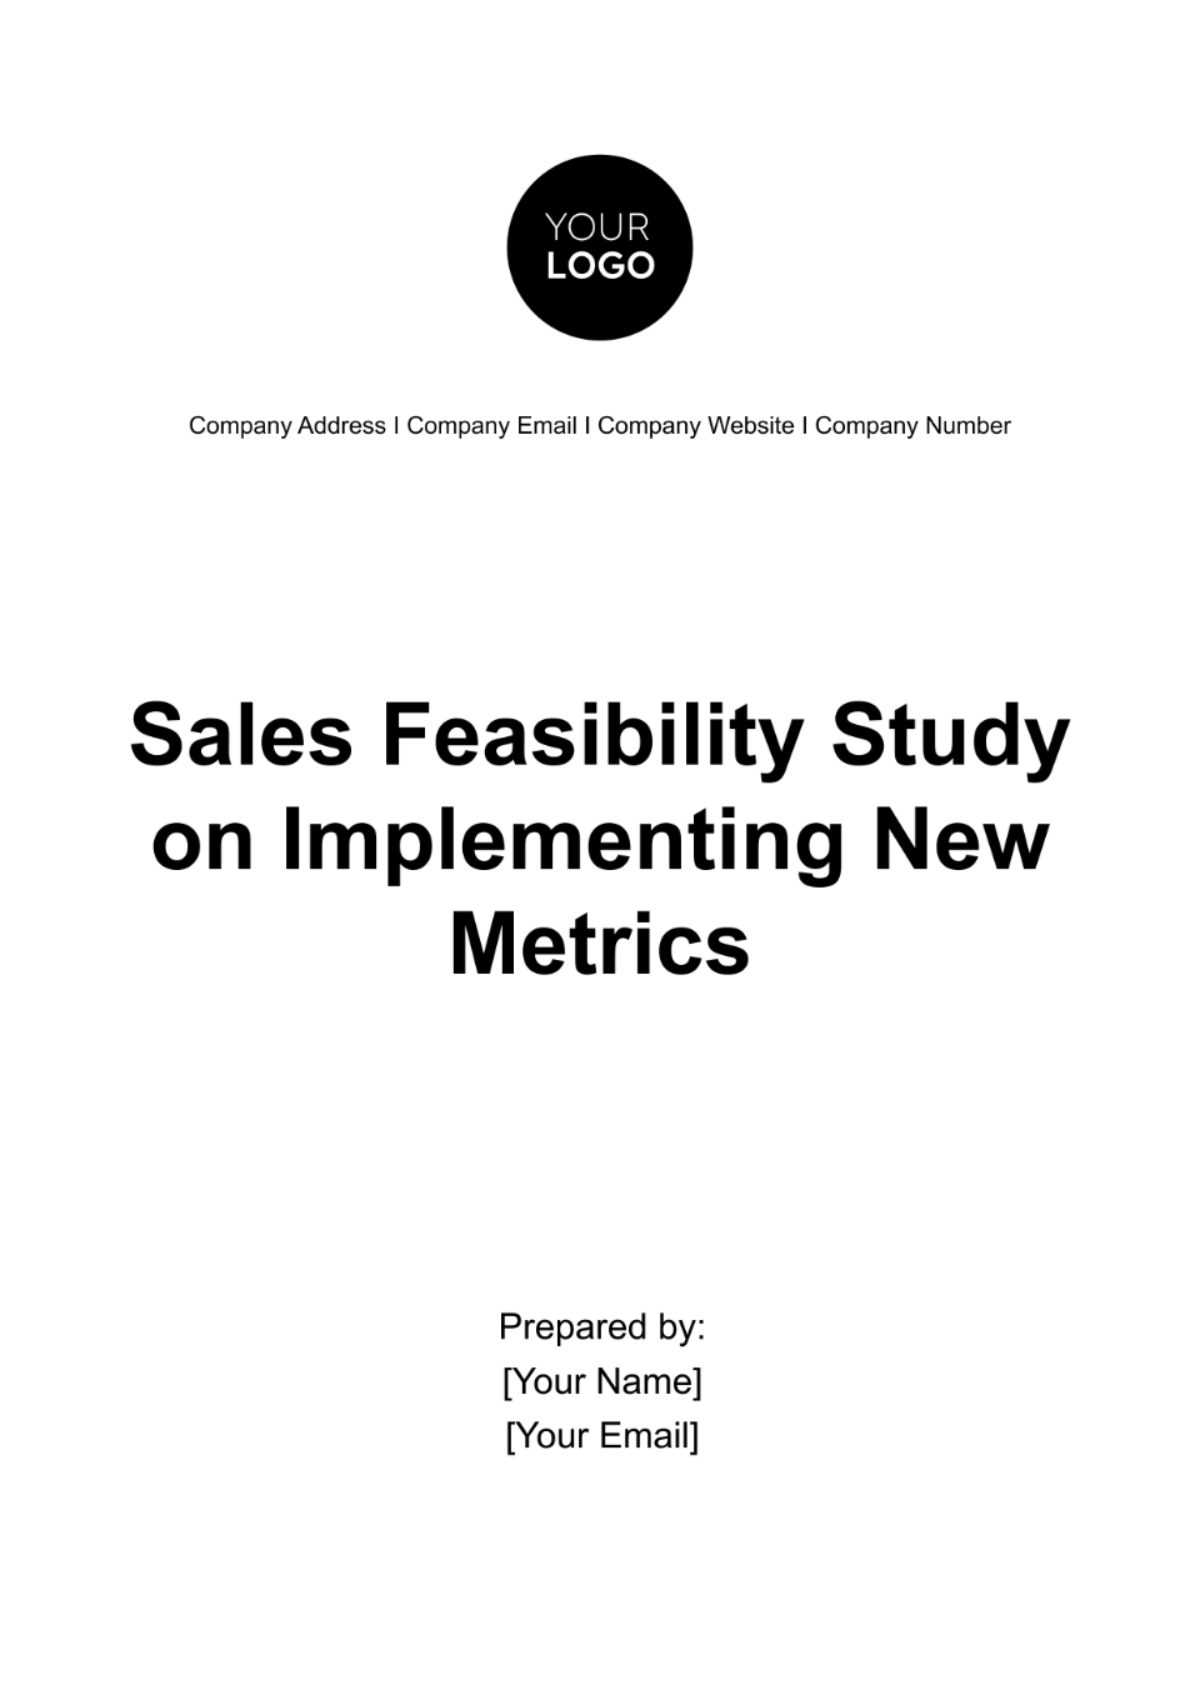 Free Sales Feasibility Study on Implementing New Metrics Template